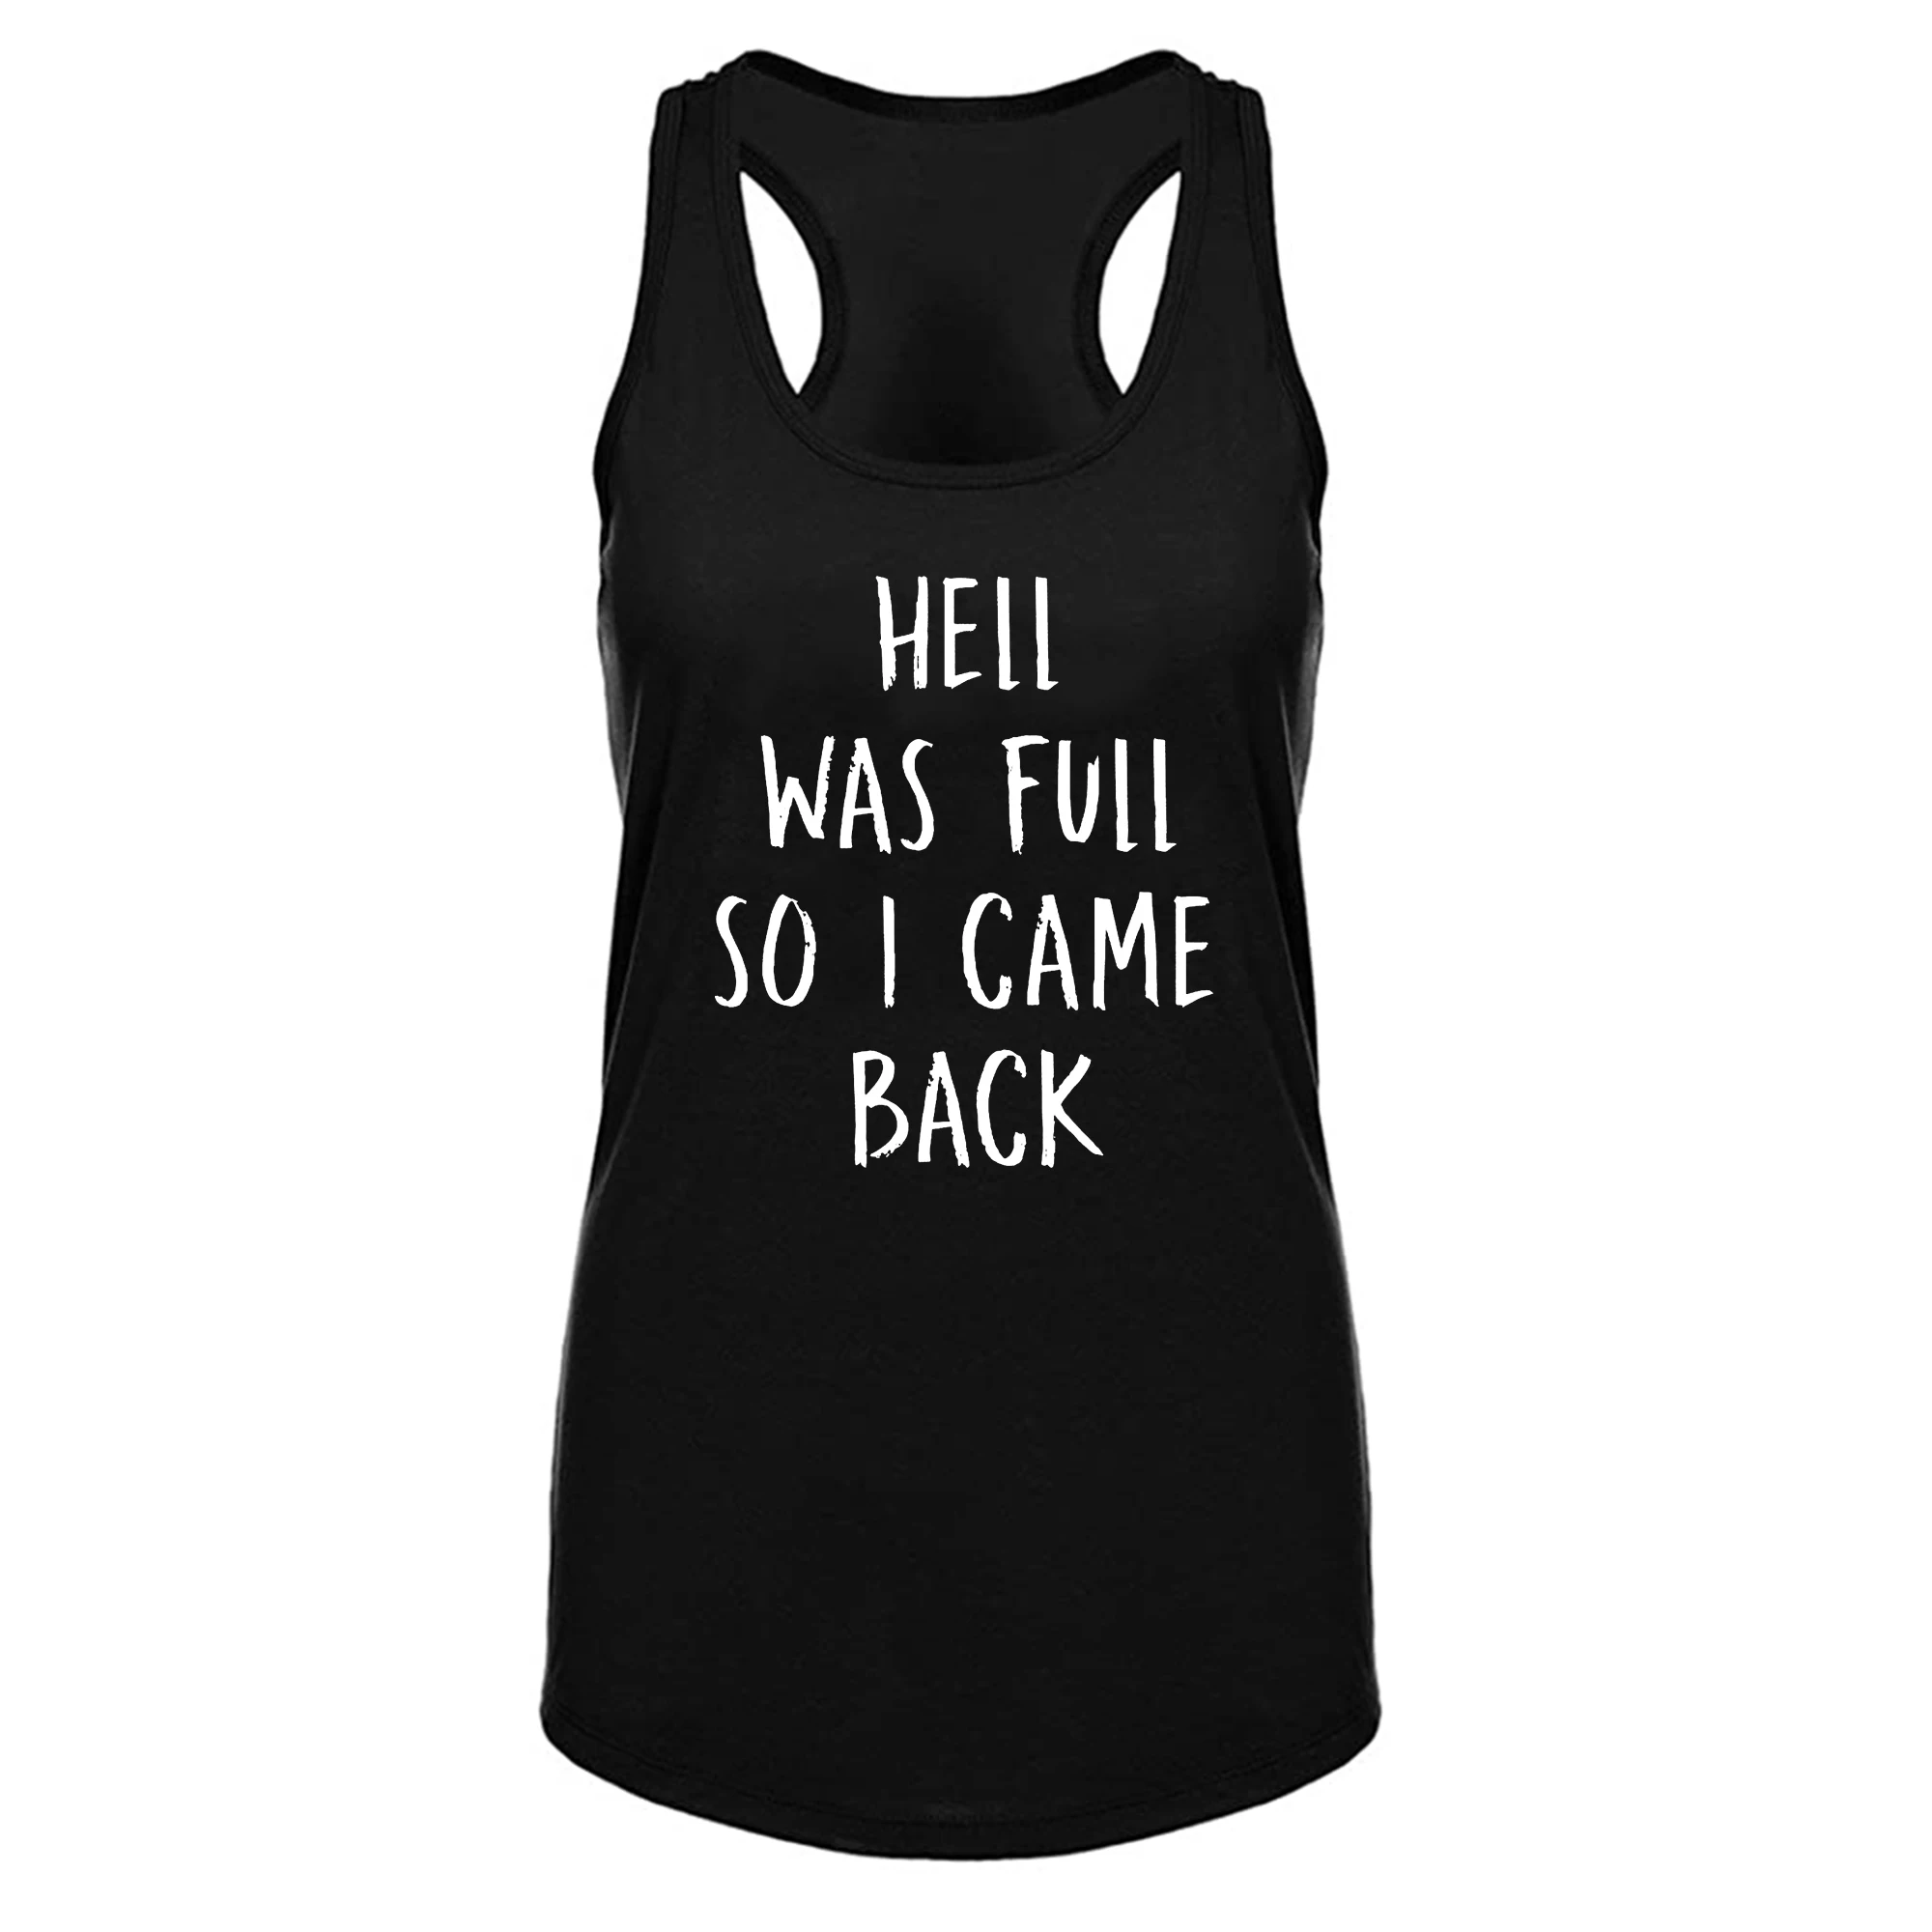 

Lyprerazy Women's Hell Was Full So I Came Back Workout Gym Funny Printed Tank Top